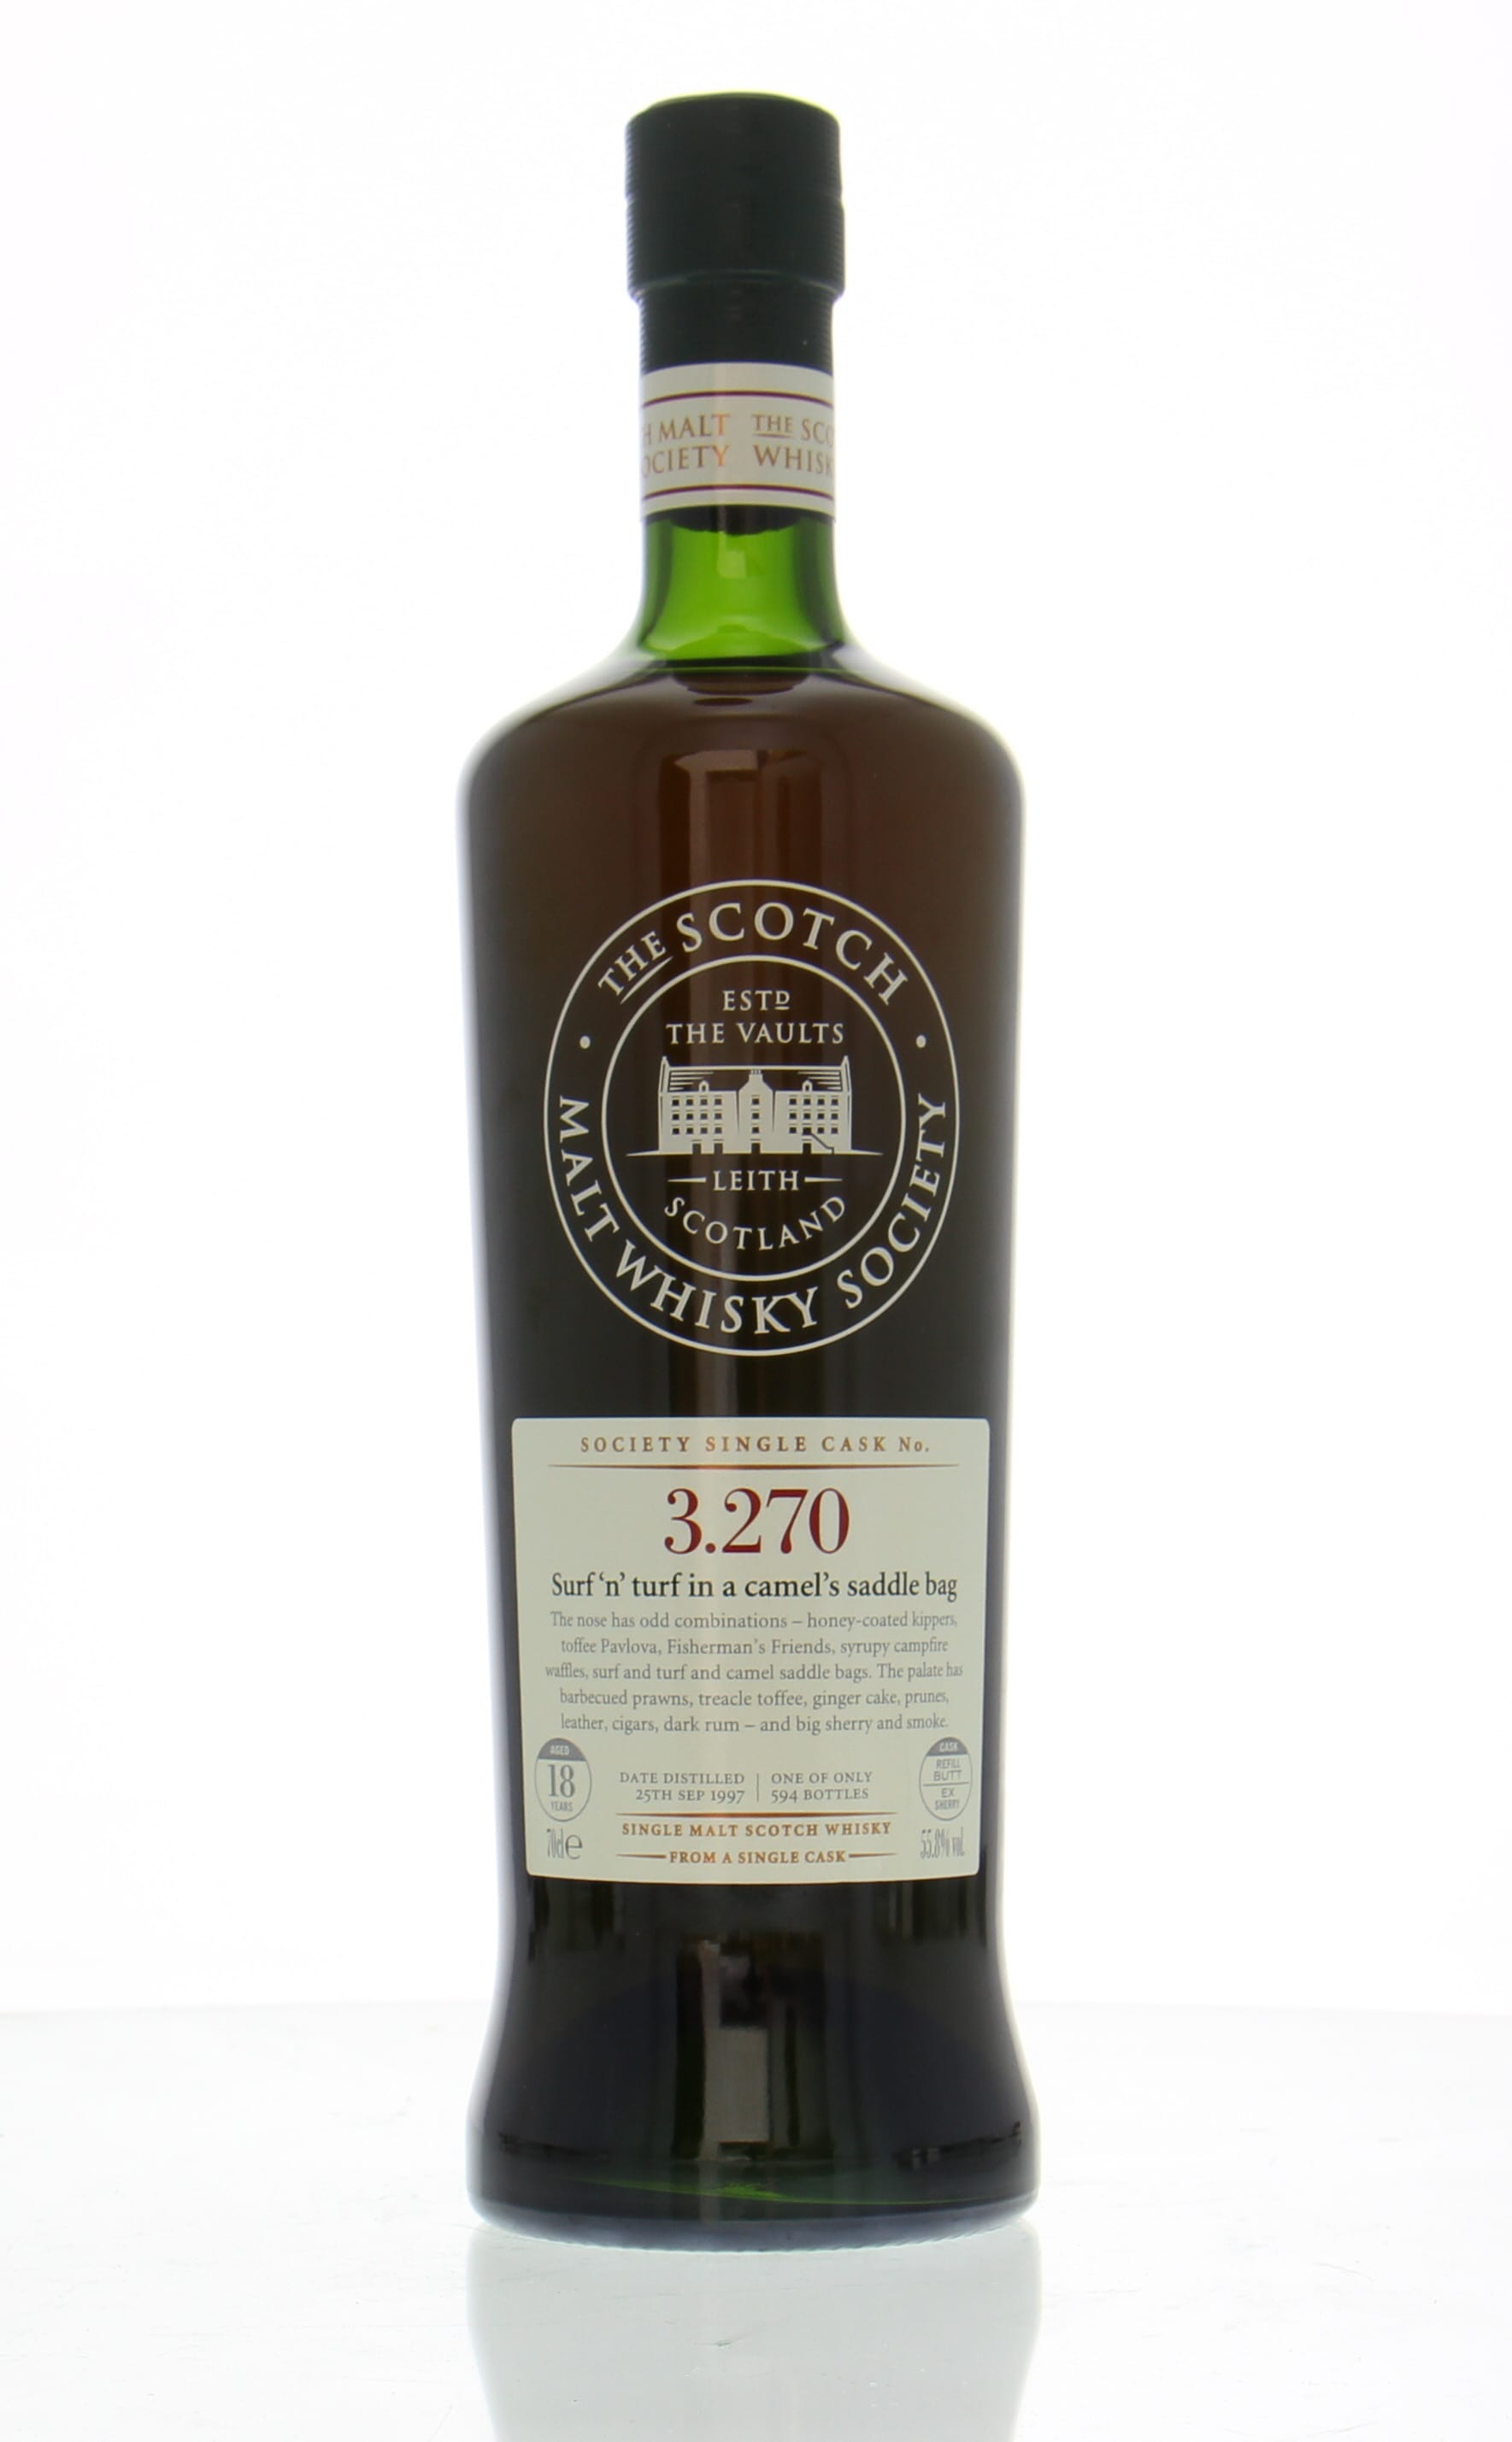 Bowmore - 18 Years Old SMWS 3.270 Surf ‘n' turf in a camel’s saddle bag 55.8% 1997 Perfect